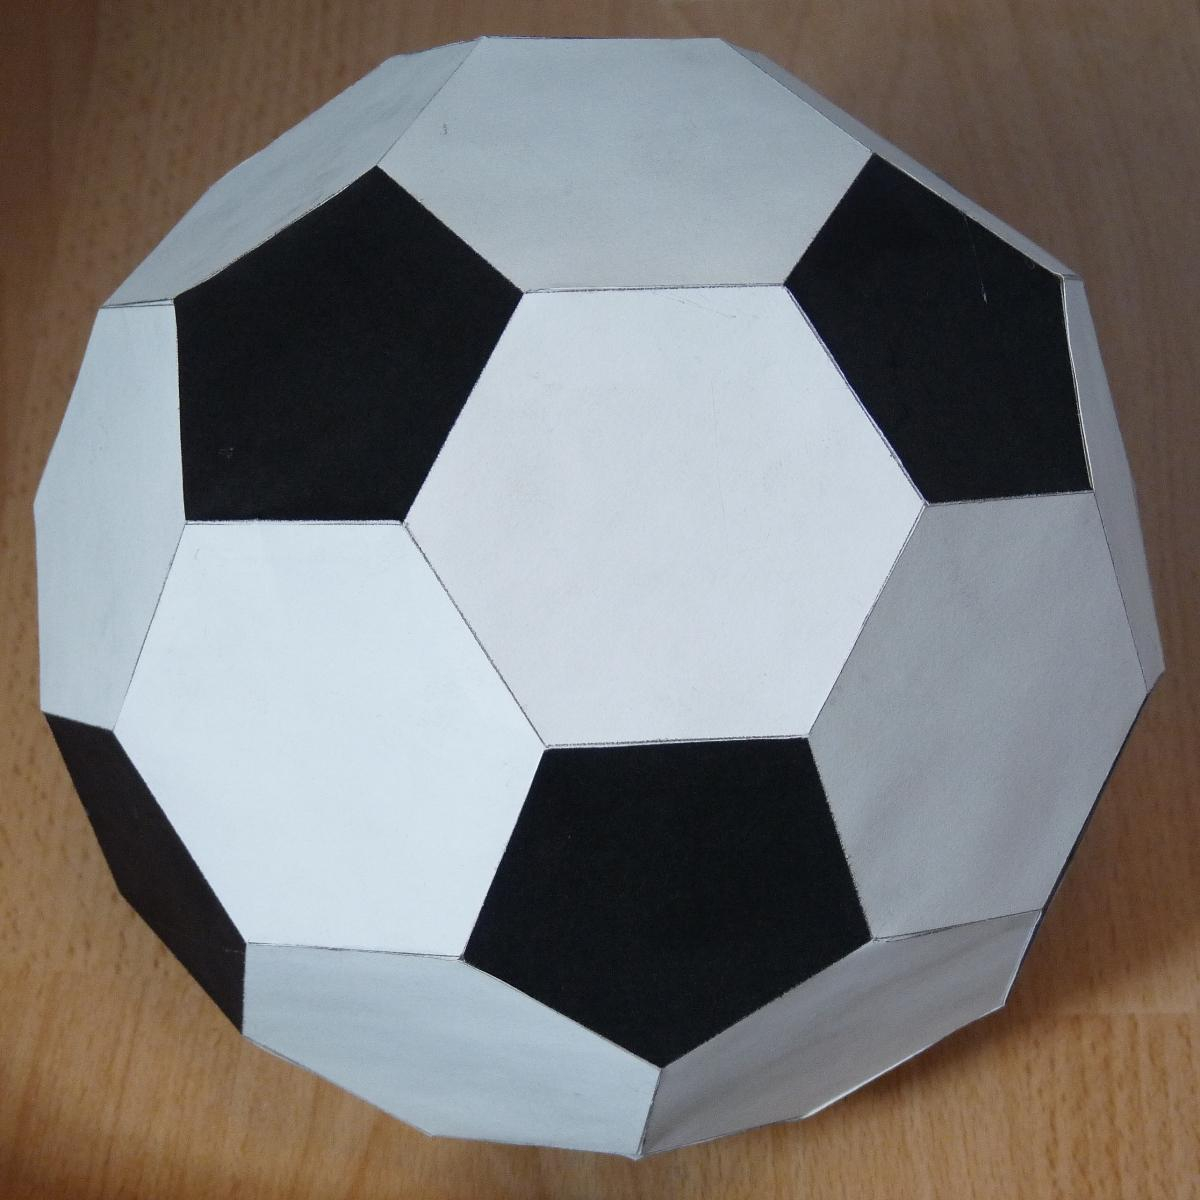 How To Make Origami Soccer Ball Paper Truncated Icosahedron Soccer Ball Or Football